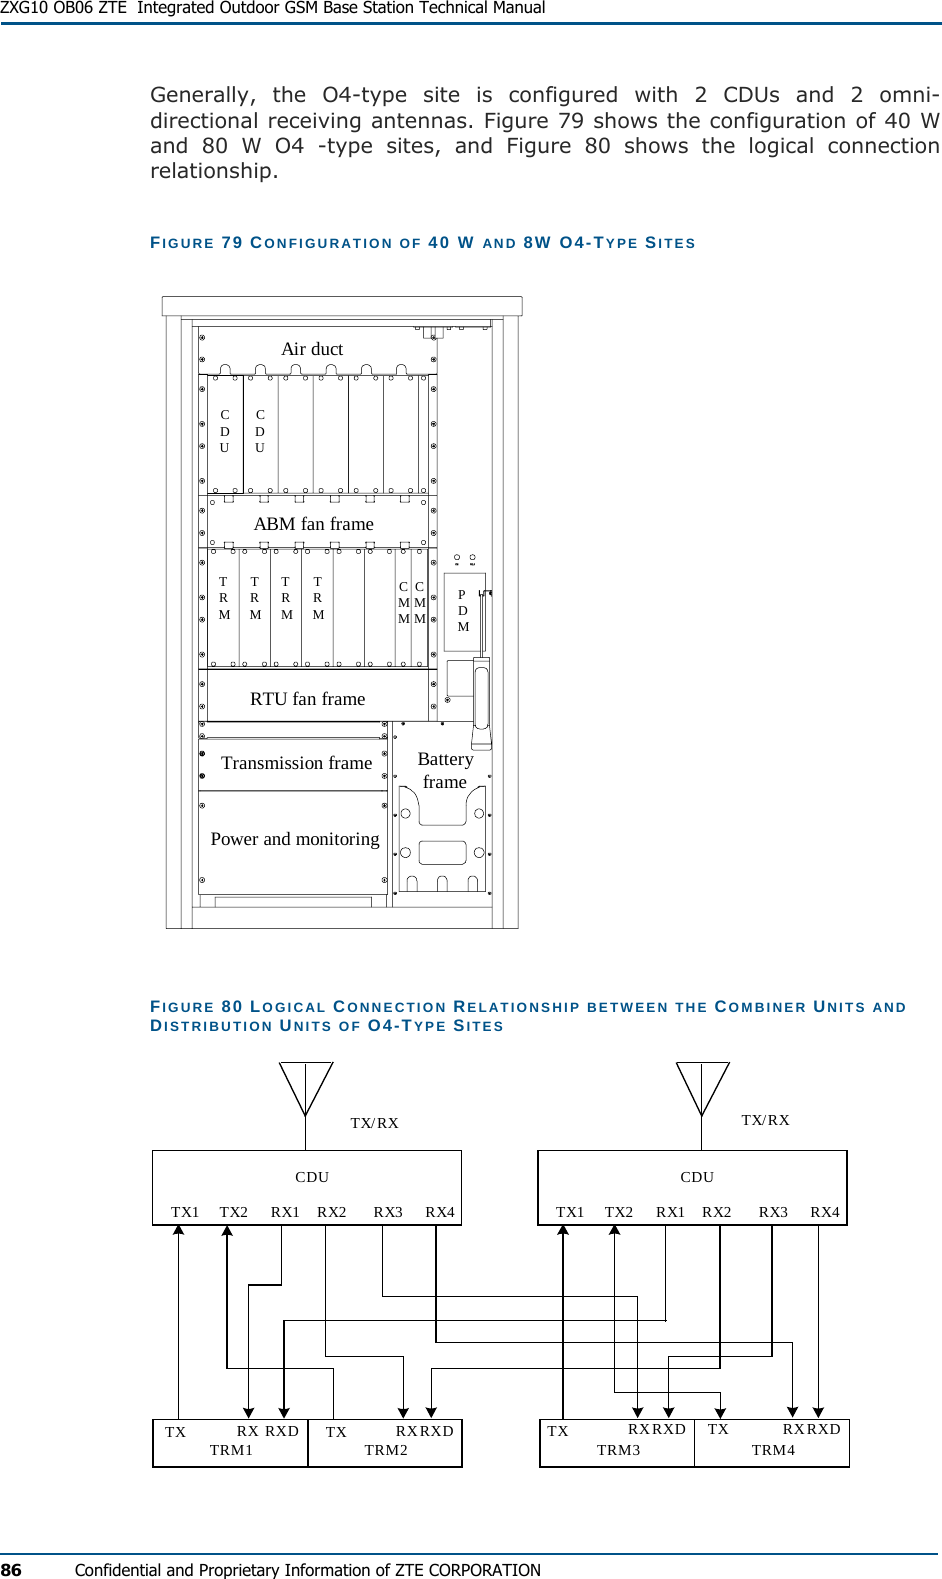  ZXG10 OB06 ZTE  Integrated Outdoor GSM Base Station Technical Manual 86  Confidential and Proprietary Information of ZTE CORPORATION Generally, the O4-type site is configured with 2 CDUs and 2 omni-directional receiving antennas. Figure 79 shows the configuration of 40 W and 80 W O4 -type sites, and Figure 80 shows the logical connection relationship. FIGURE 79 CONFIGURATION OF 40 W AND 8W O4-TYPE SITES TRMTRMCDUTRMCMMCMMPDMCDUTRMBatteryframePower and monitoringTransmission frameRTU fan frameAir ductABM fan frame FIGURE 80 LOGICAL CONNECTION RELATIONSHIP BETWEEN THE COMBINER UNITS AND DISTRIBUTION UNITS OF O4-TYPE SITES TX/RX TX/RXTRM1TX RX RXD TRM2TX RXRXD TRM4TX RXRXDCDUTX1 TX2 RX1 RX2 RX3 RX4CDUTX1 TX2 RX1 RX2 RX3 RX4TRM3TX RXRXD  